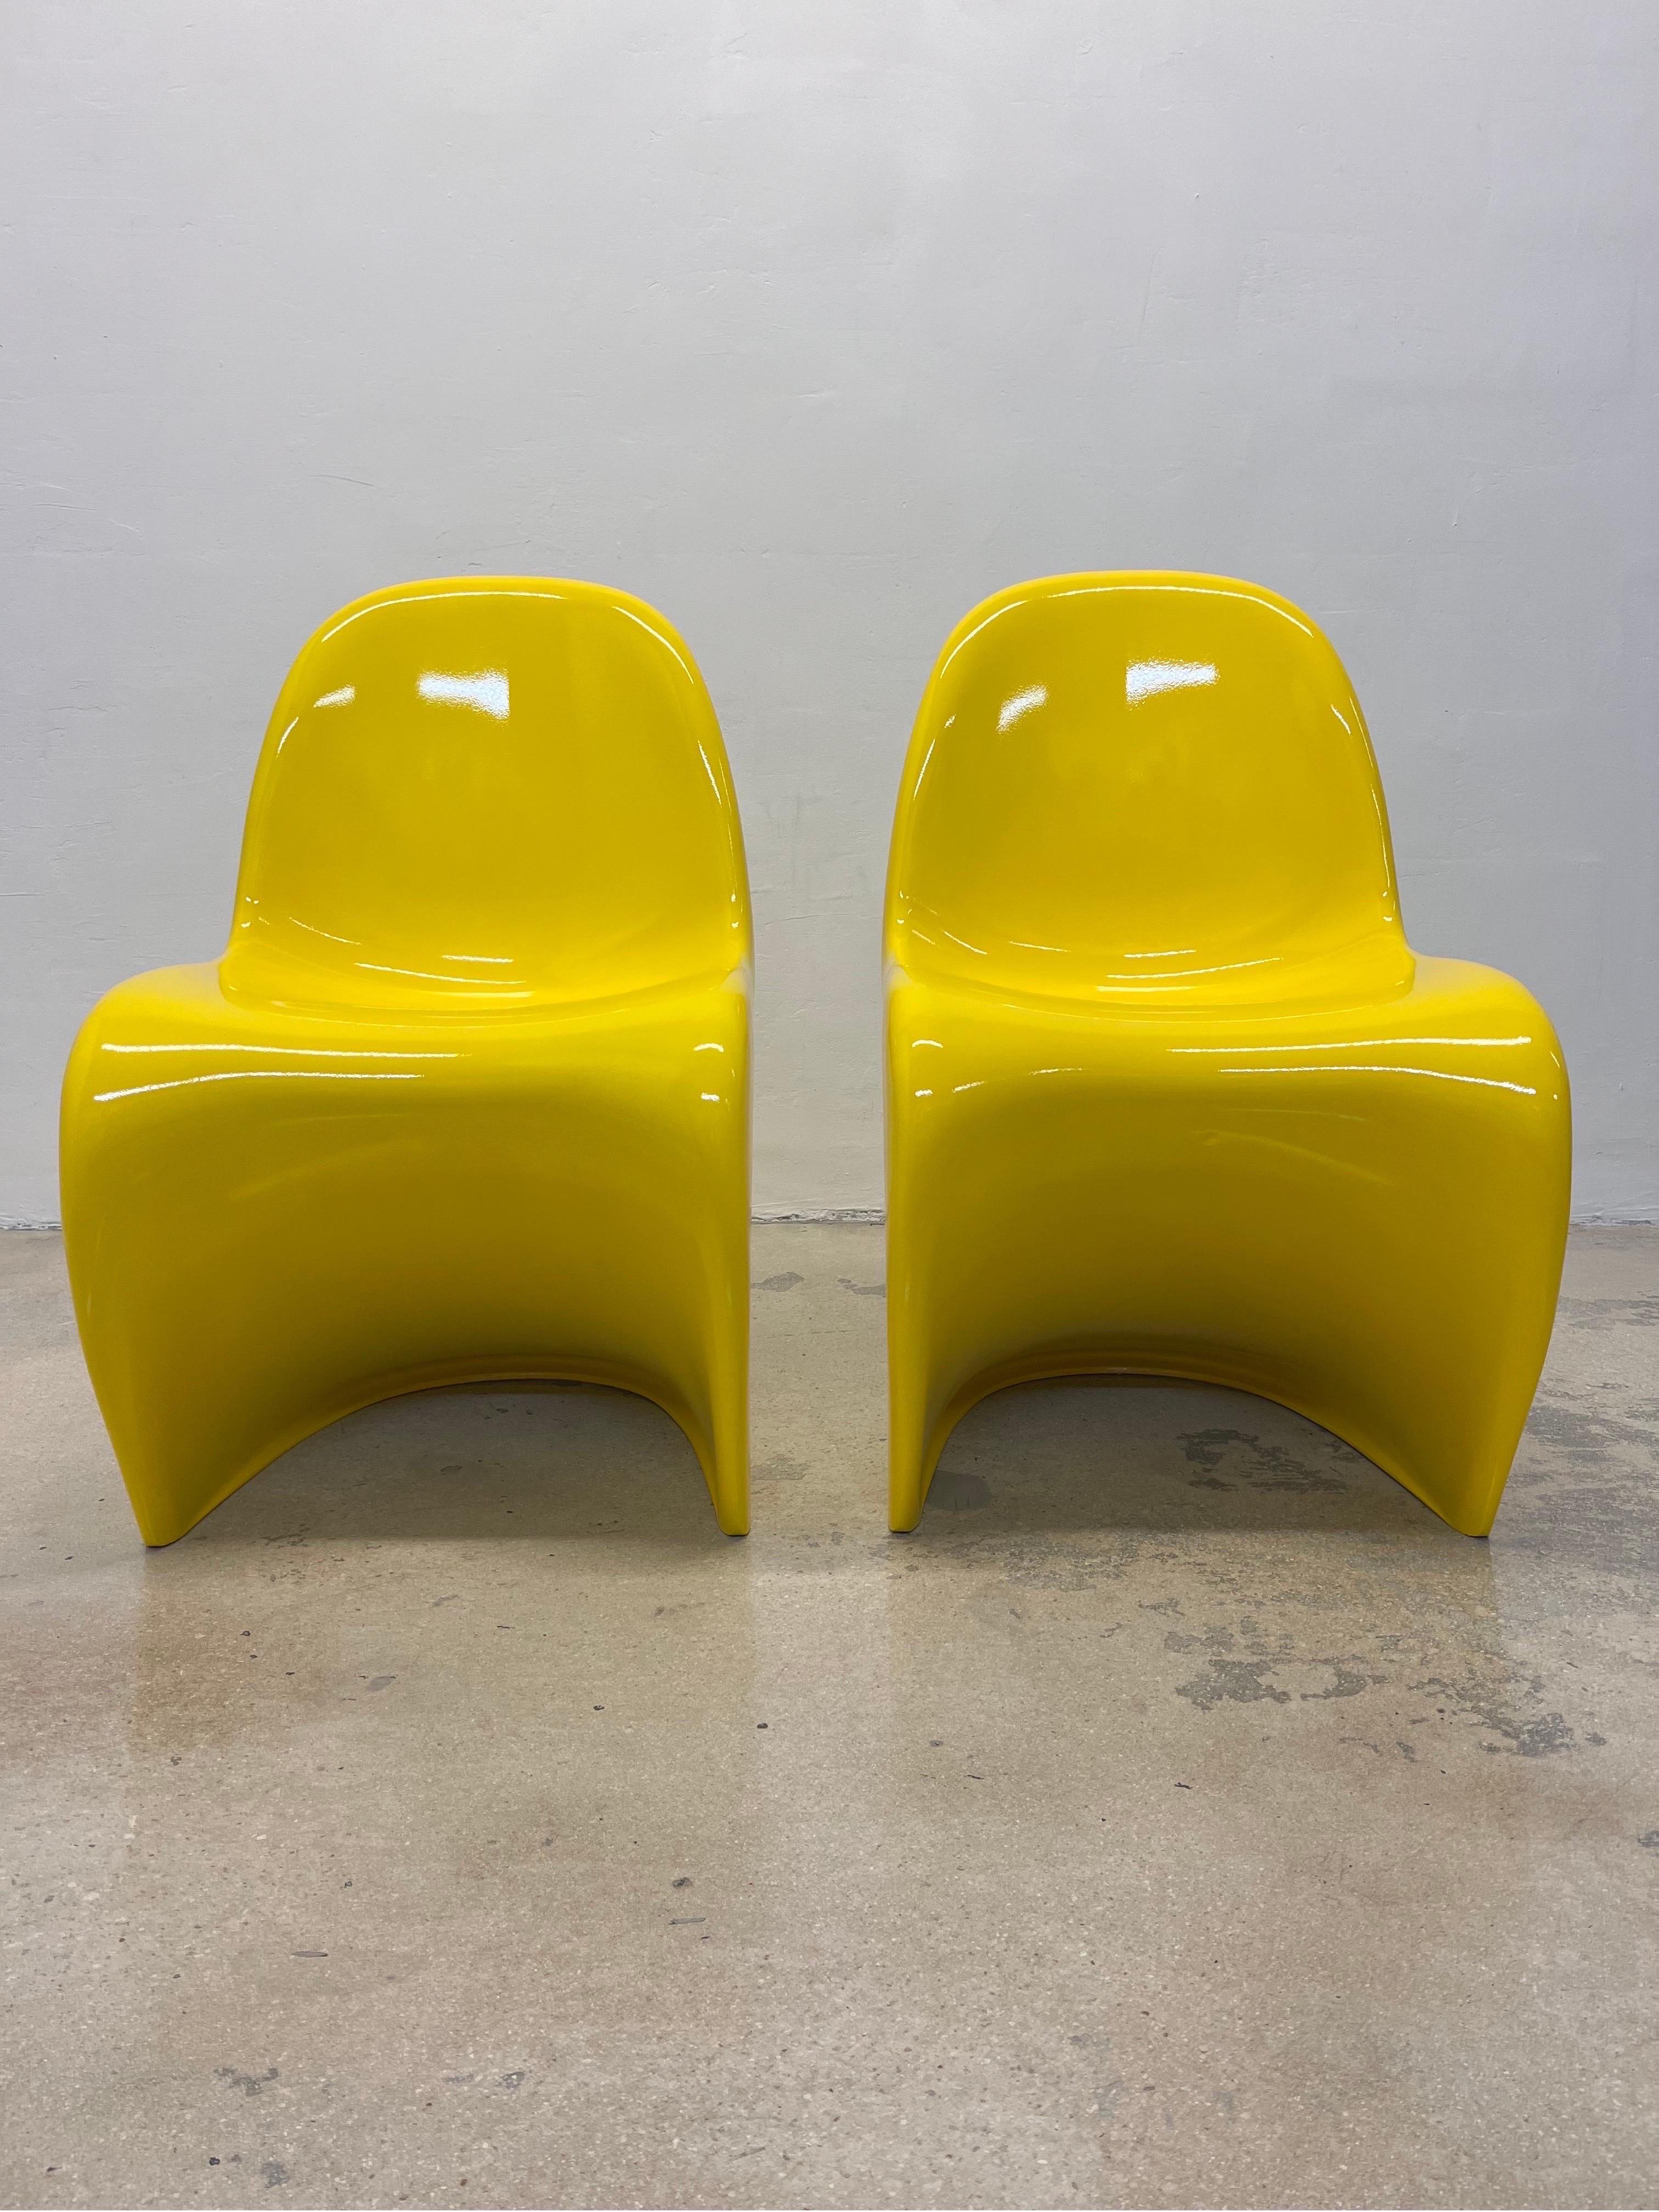 Verner Panton Classic Panton S Chairs for Vitra, 1990s - a Pair 1